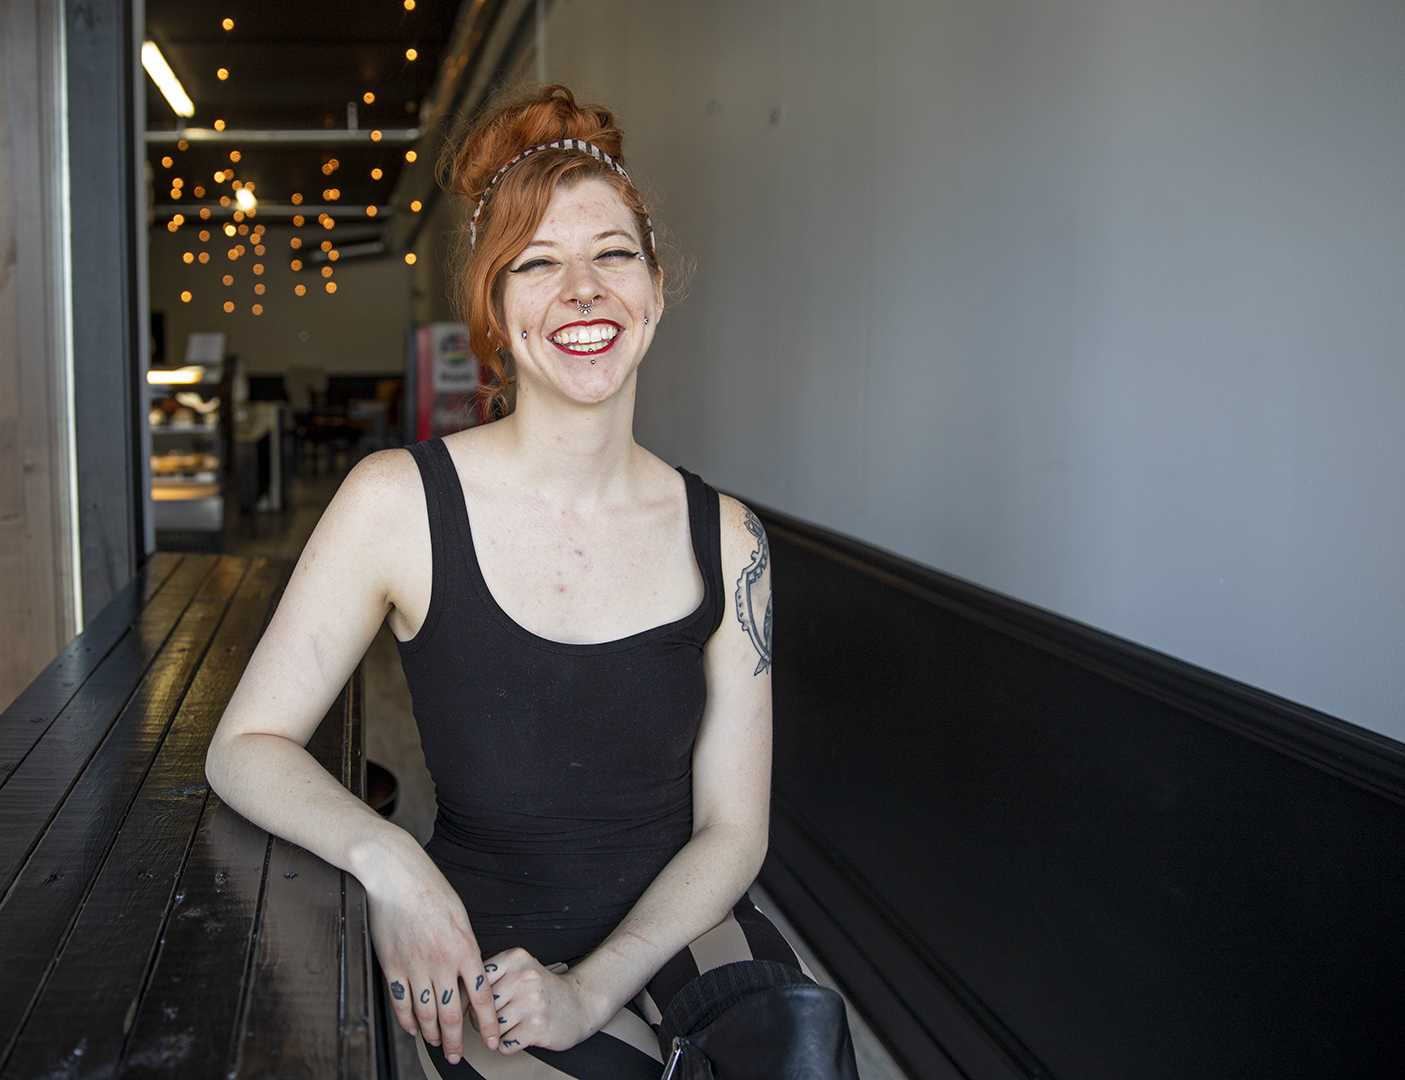 Alison+Taylor%2C+27%2C+owner+of+Little+Fox+Bakery%2C+opened+up+her+bakery+that+she+has+been+planning+for+years+about+three+months+ago+located+on+East+Main+ave.+Taylor+features+different+varieties+of+baked+goods+including+cookies%2C+macaroons%2C+homemade+oreos%2C+homemade+poptarts%2C+and+her+specialty+in+cupcakes+which+come+in+many+unique+flavors.+Taylor+plans+on+updating+the+bakery+space+by+adding+artwork+by+local+artists+and+experimenting+on+creating+more+unique+sweets.